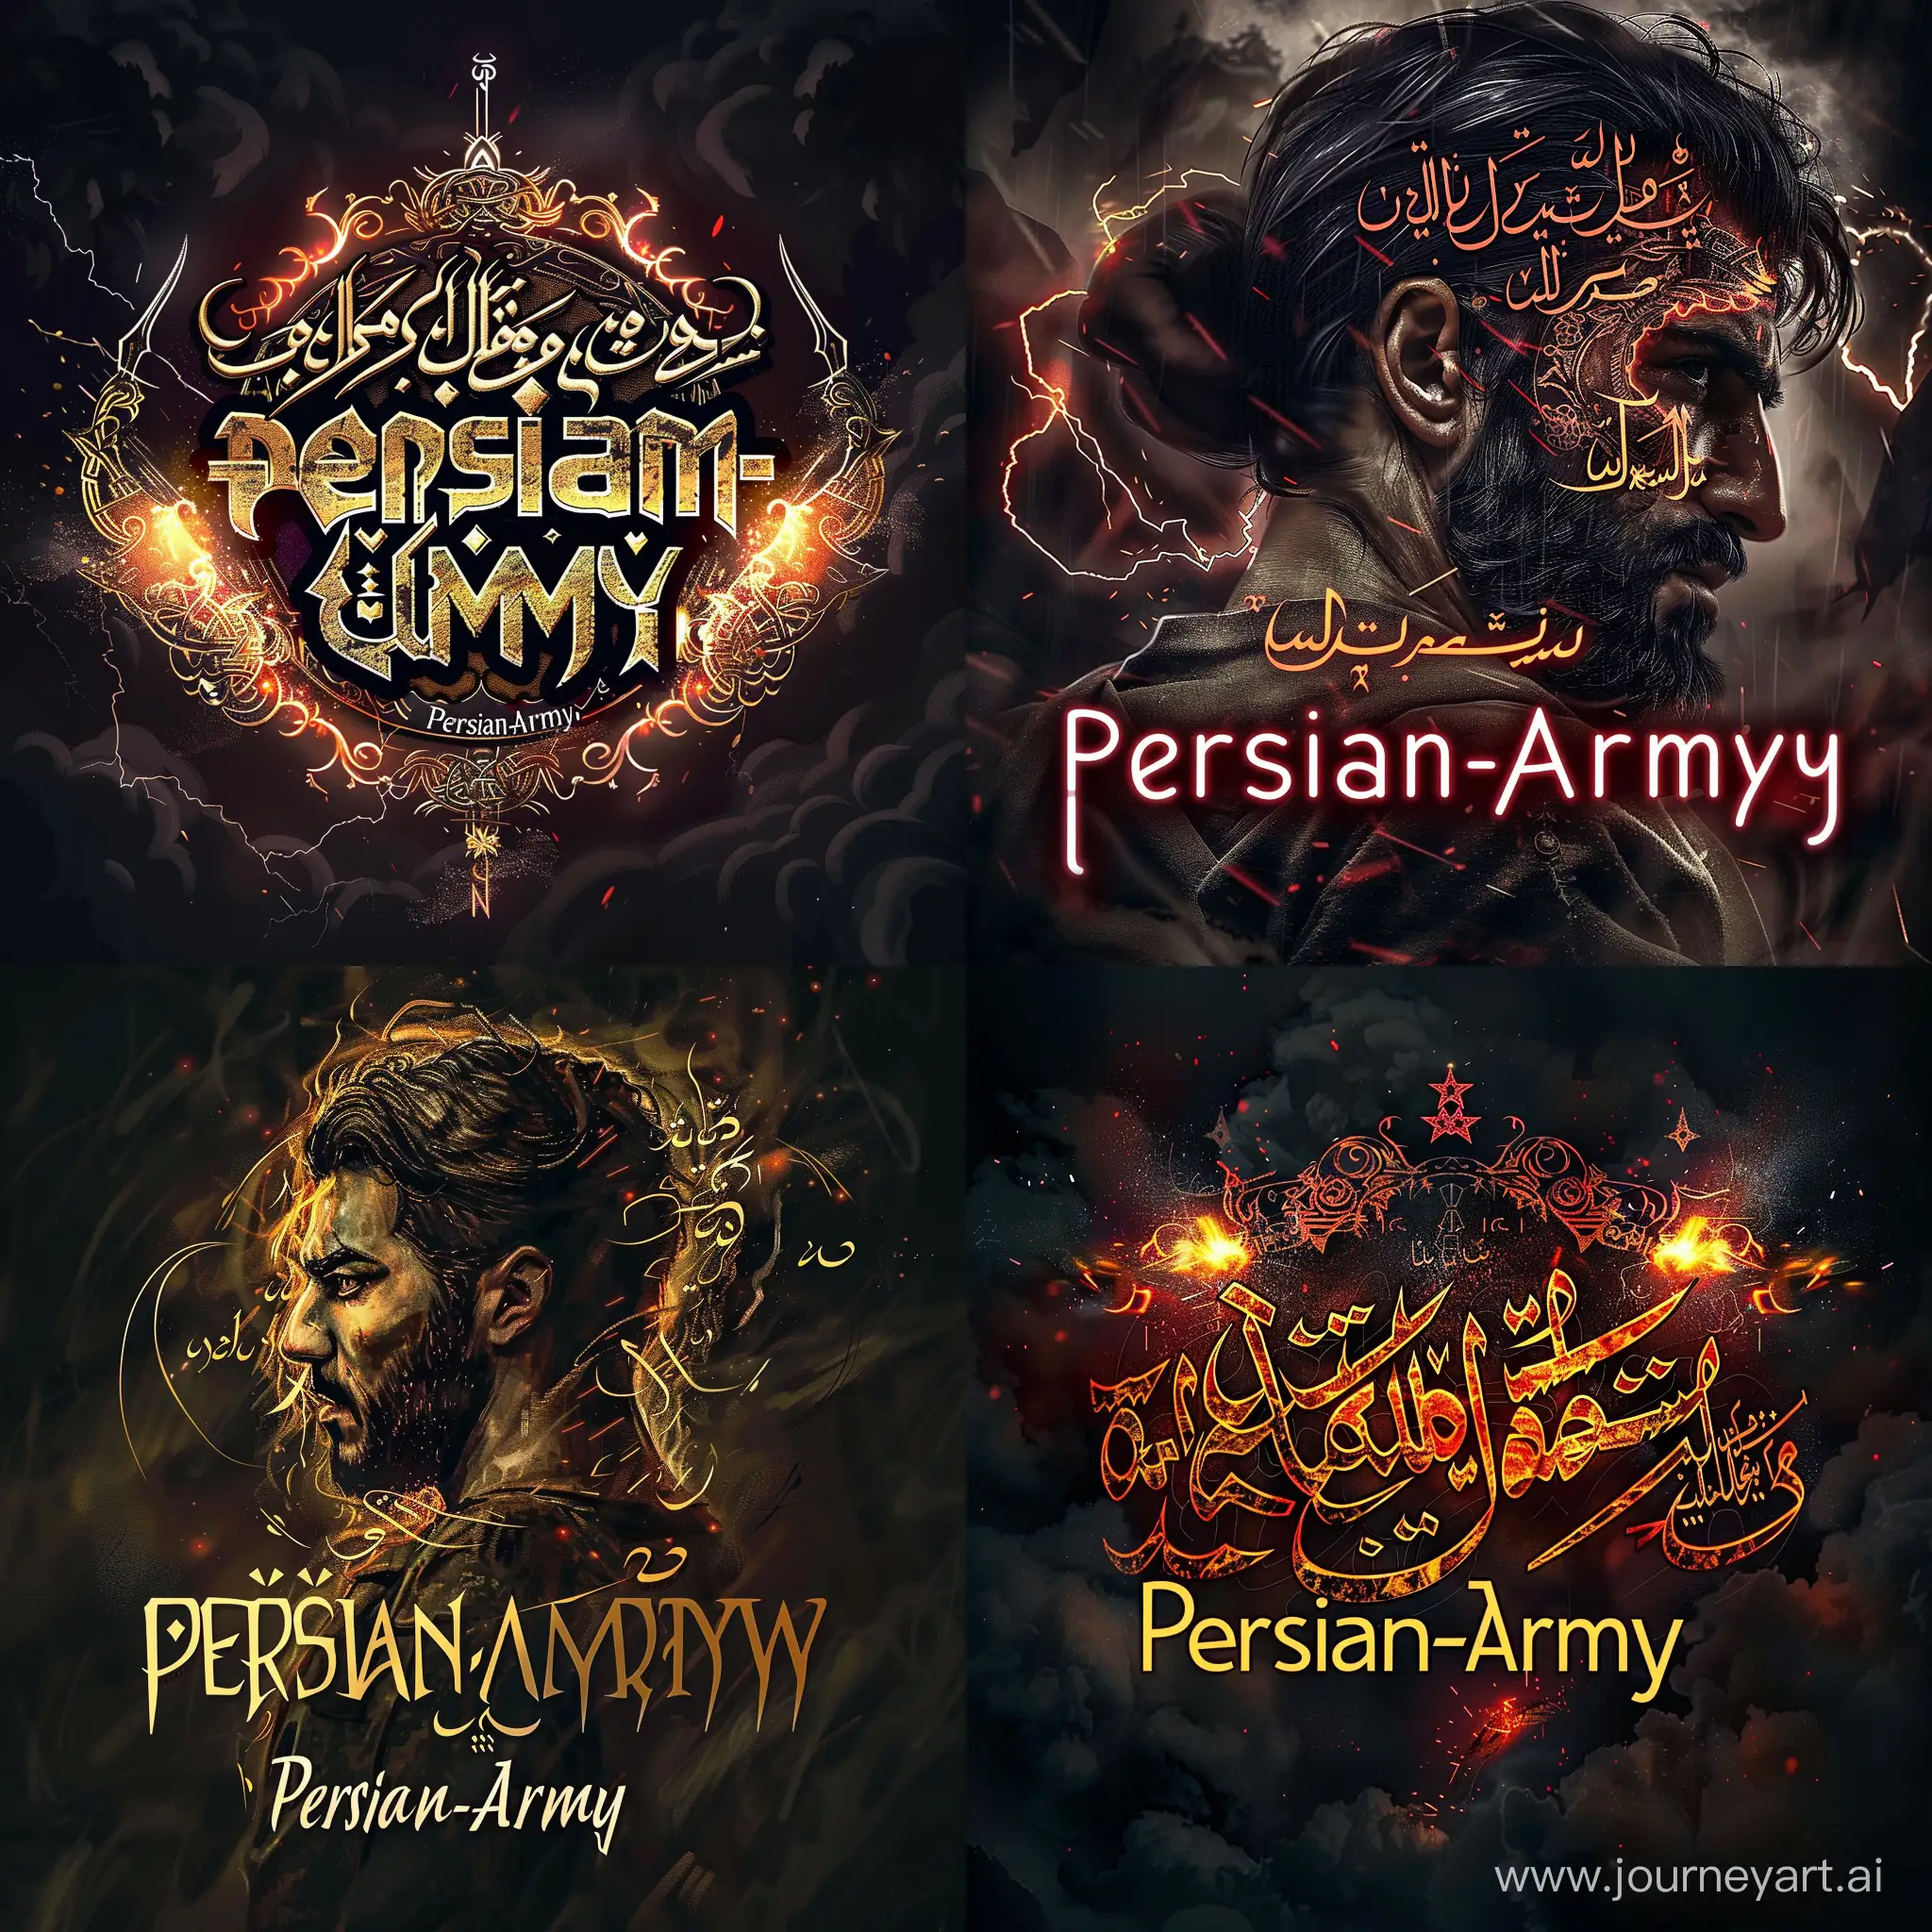  an impressive profile picture with the phrase “Persian-Army” prominently featured, incorporating elements of strength and valour, with Persian calligraphy and symbols of power and heritage, high-contrast lighting for a striking effect --ar 1:1